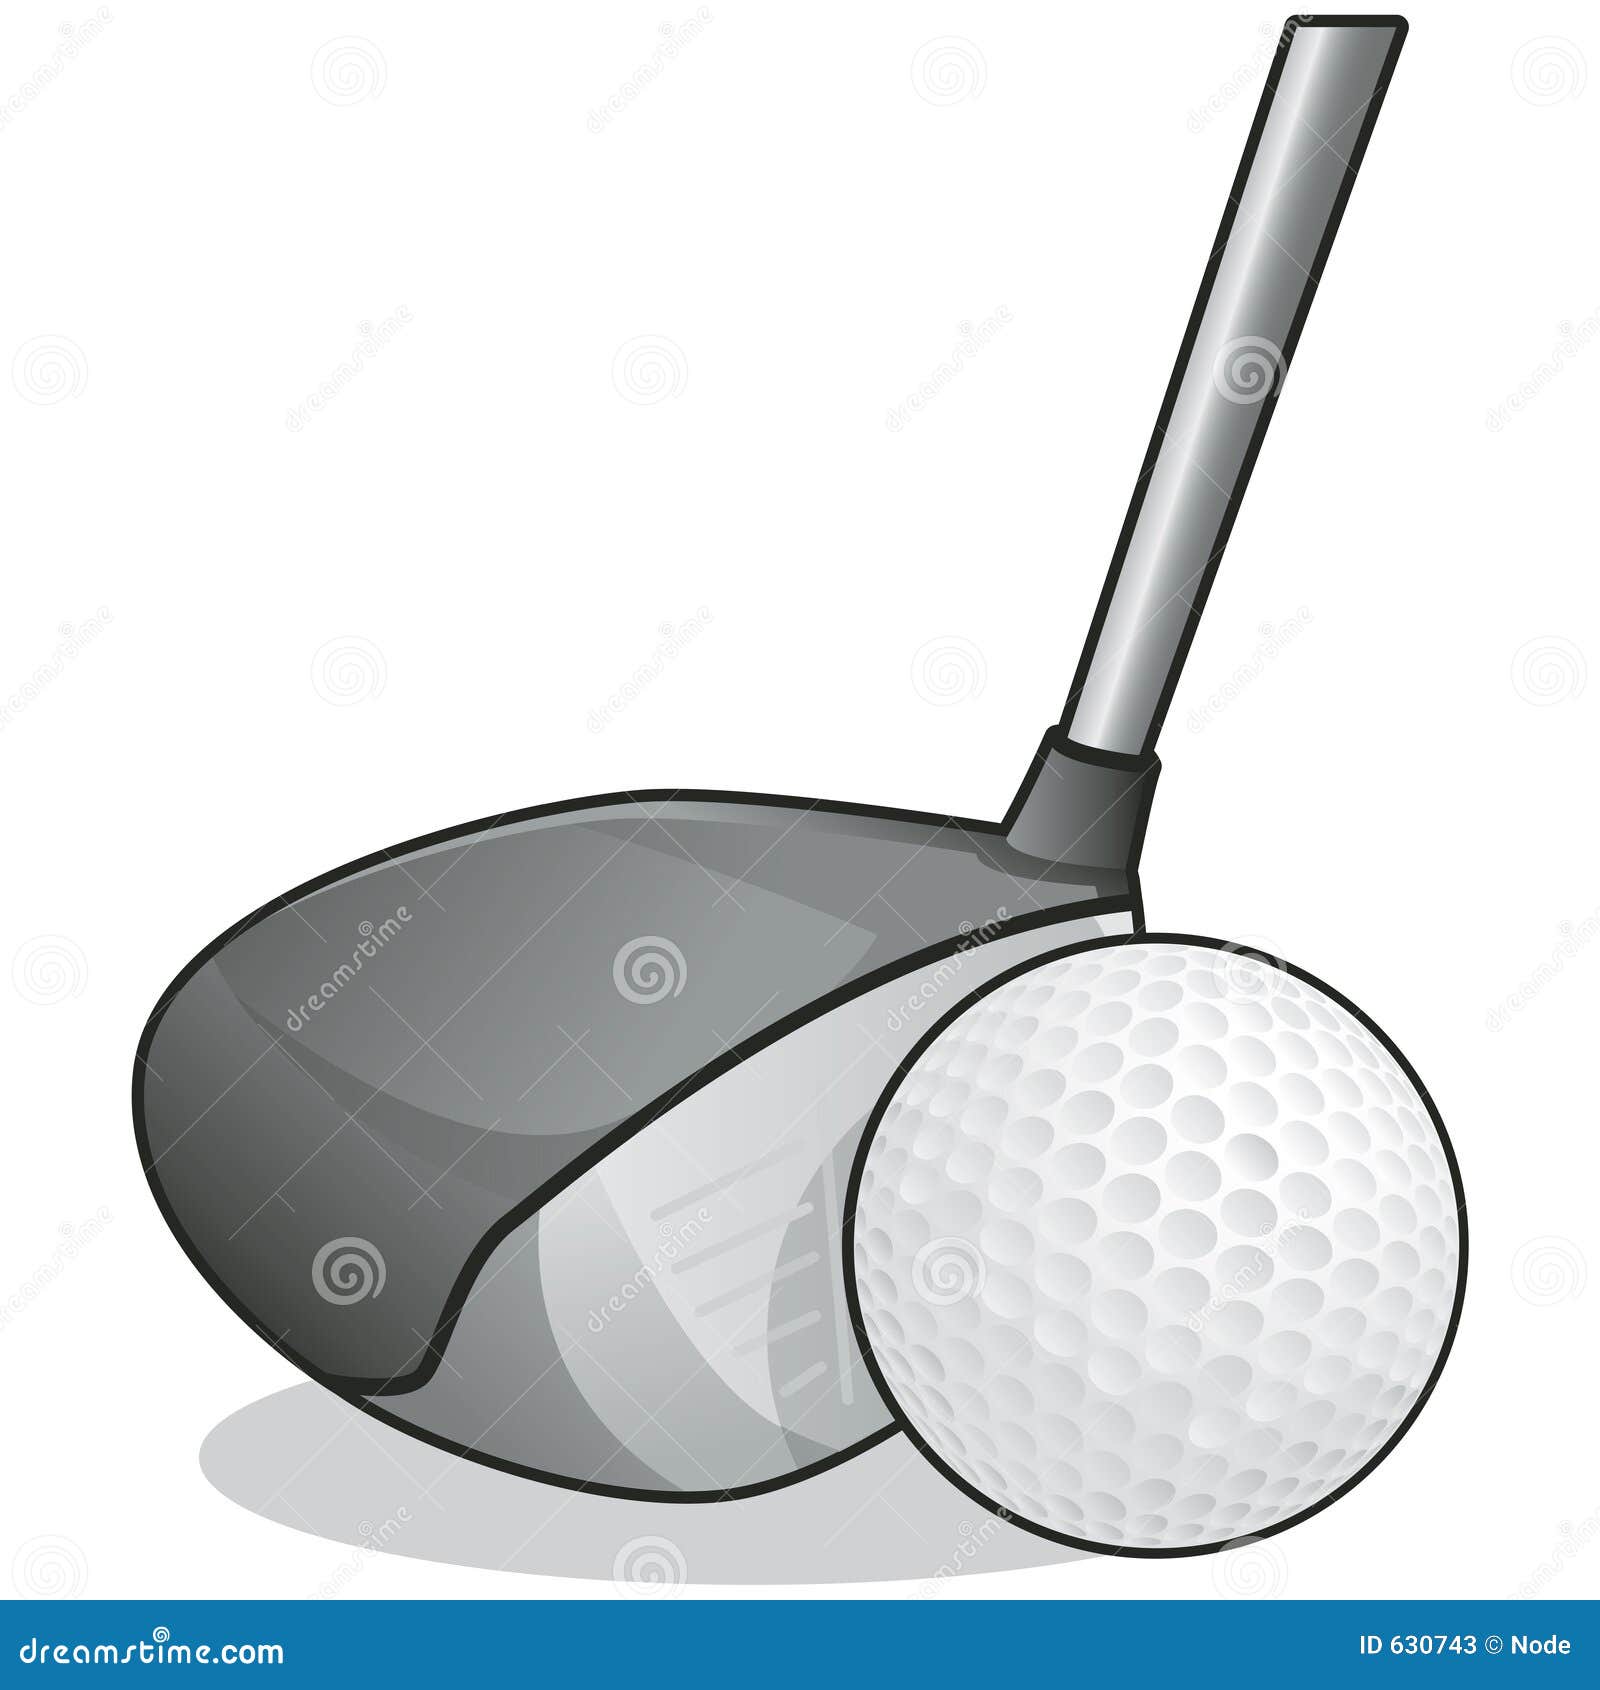 golf clubs and balls clipart - photo #31